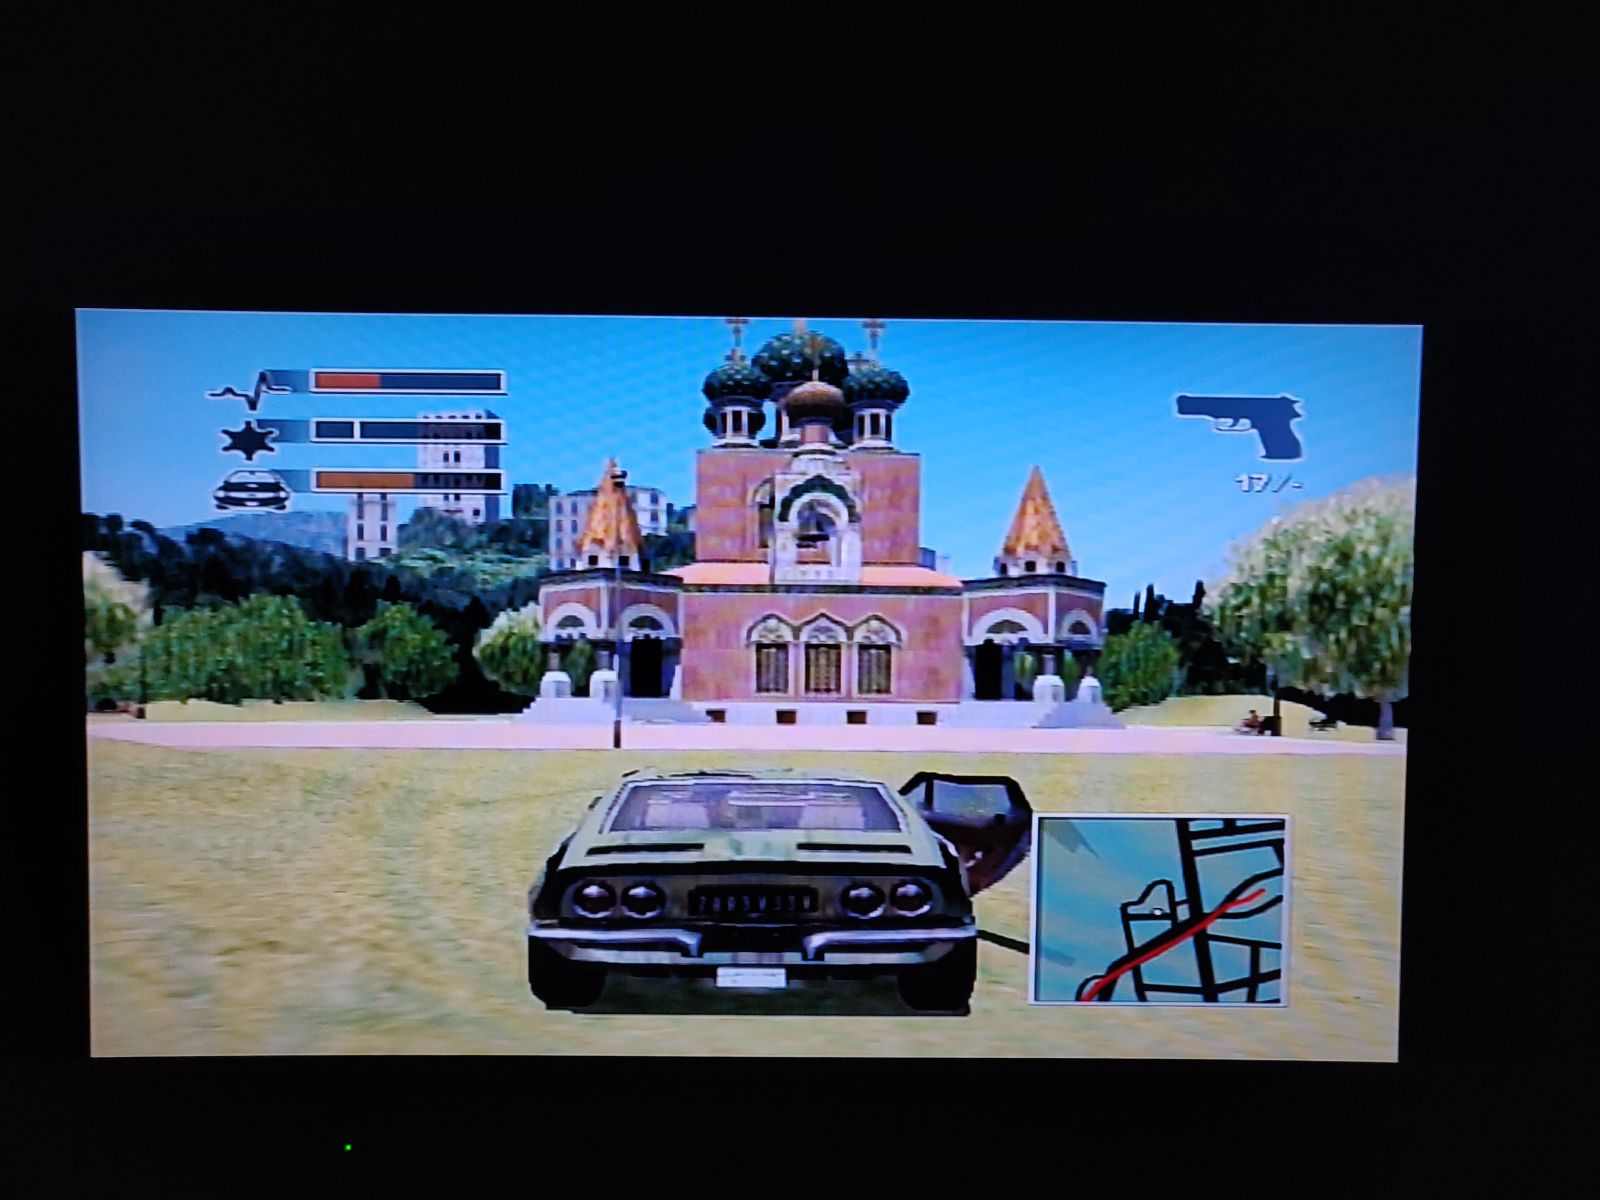 Russian Orthodox Cathedral. It’s pretty low detail in game, but you can see the resemblance, particularly those green bulbs up top.
In the game a “Timmy Vermicelli” is here waiting to kill you.
In real life I didn’t get that close as it’s nowhere near as open as in the game.